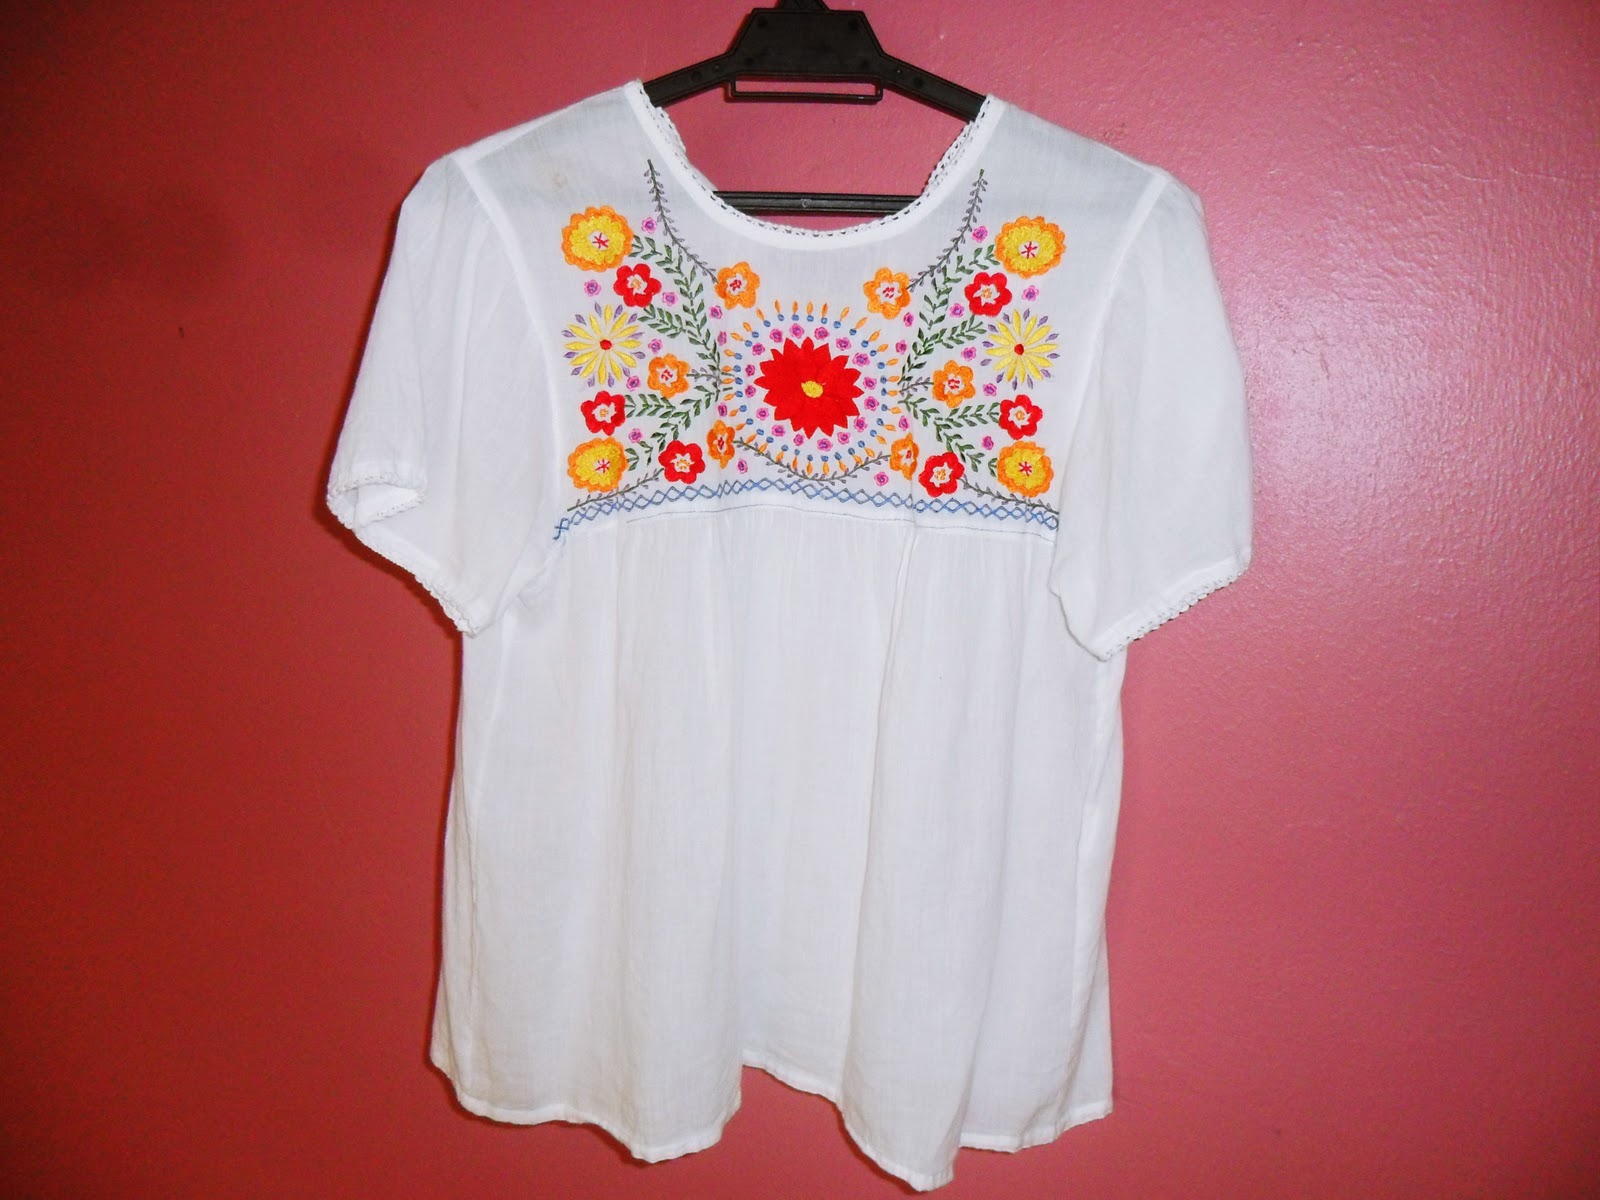 heart me blog: Vintage Embroidery Top